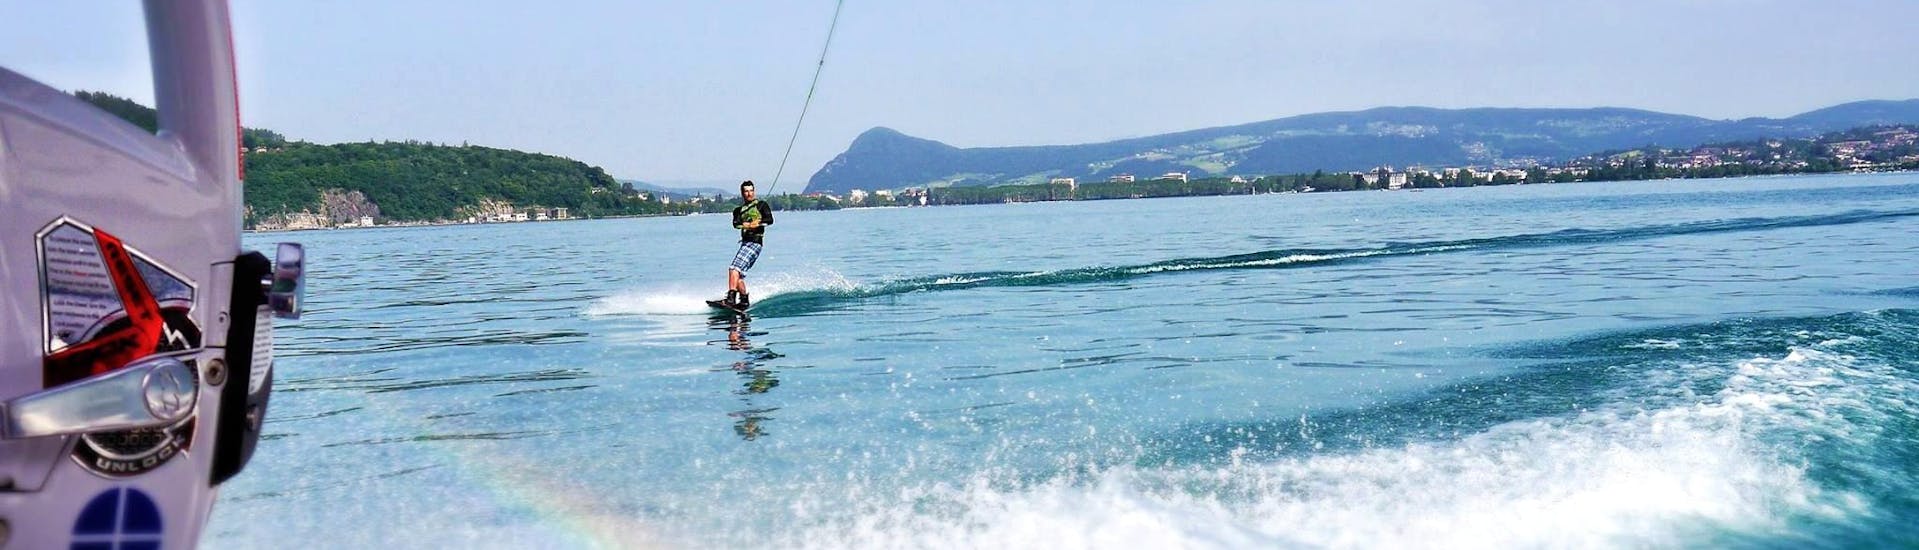 A man is taking advantage of his Private Boat Rental with Wakesurf & Wakeboard on Lake Annecy to take a wakeboarding lesson with Le Spot.